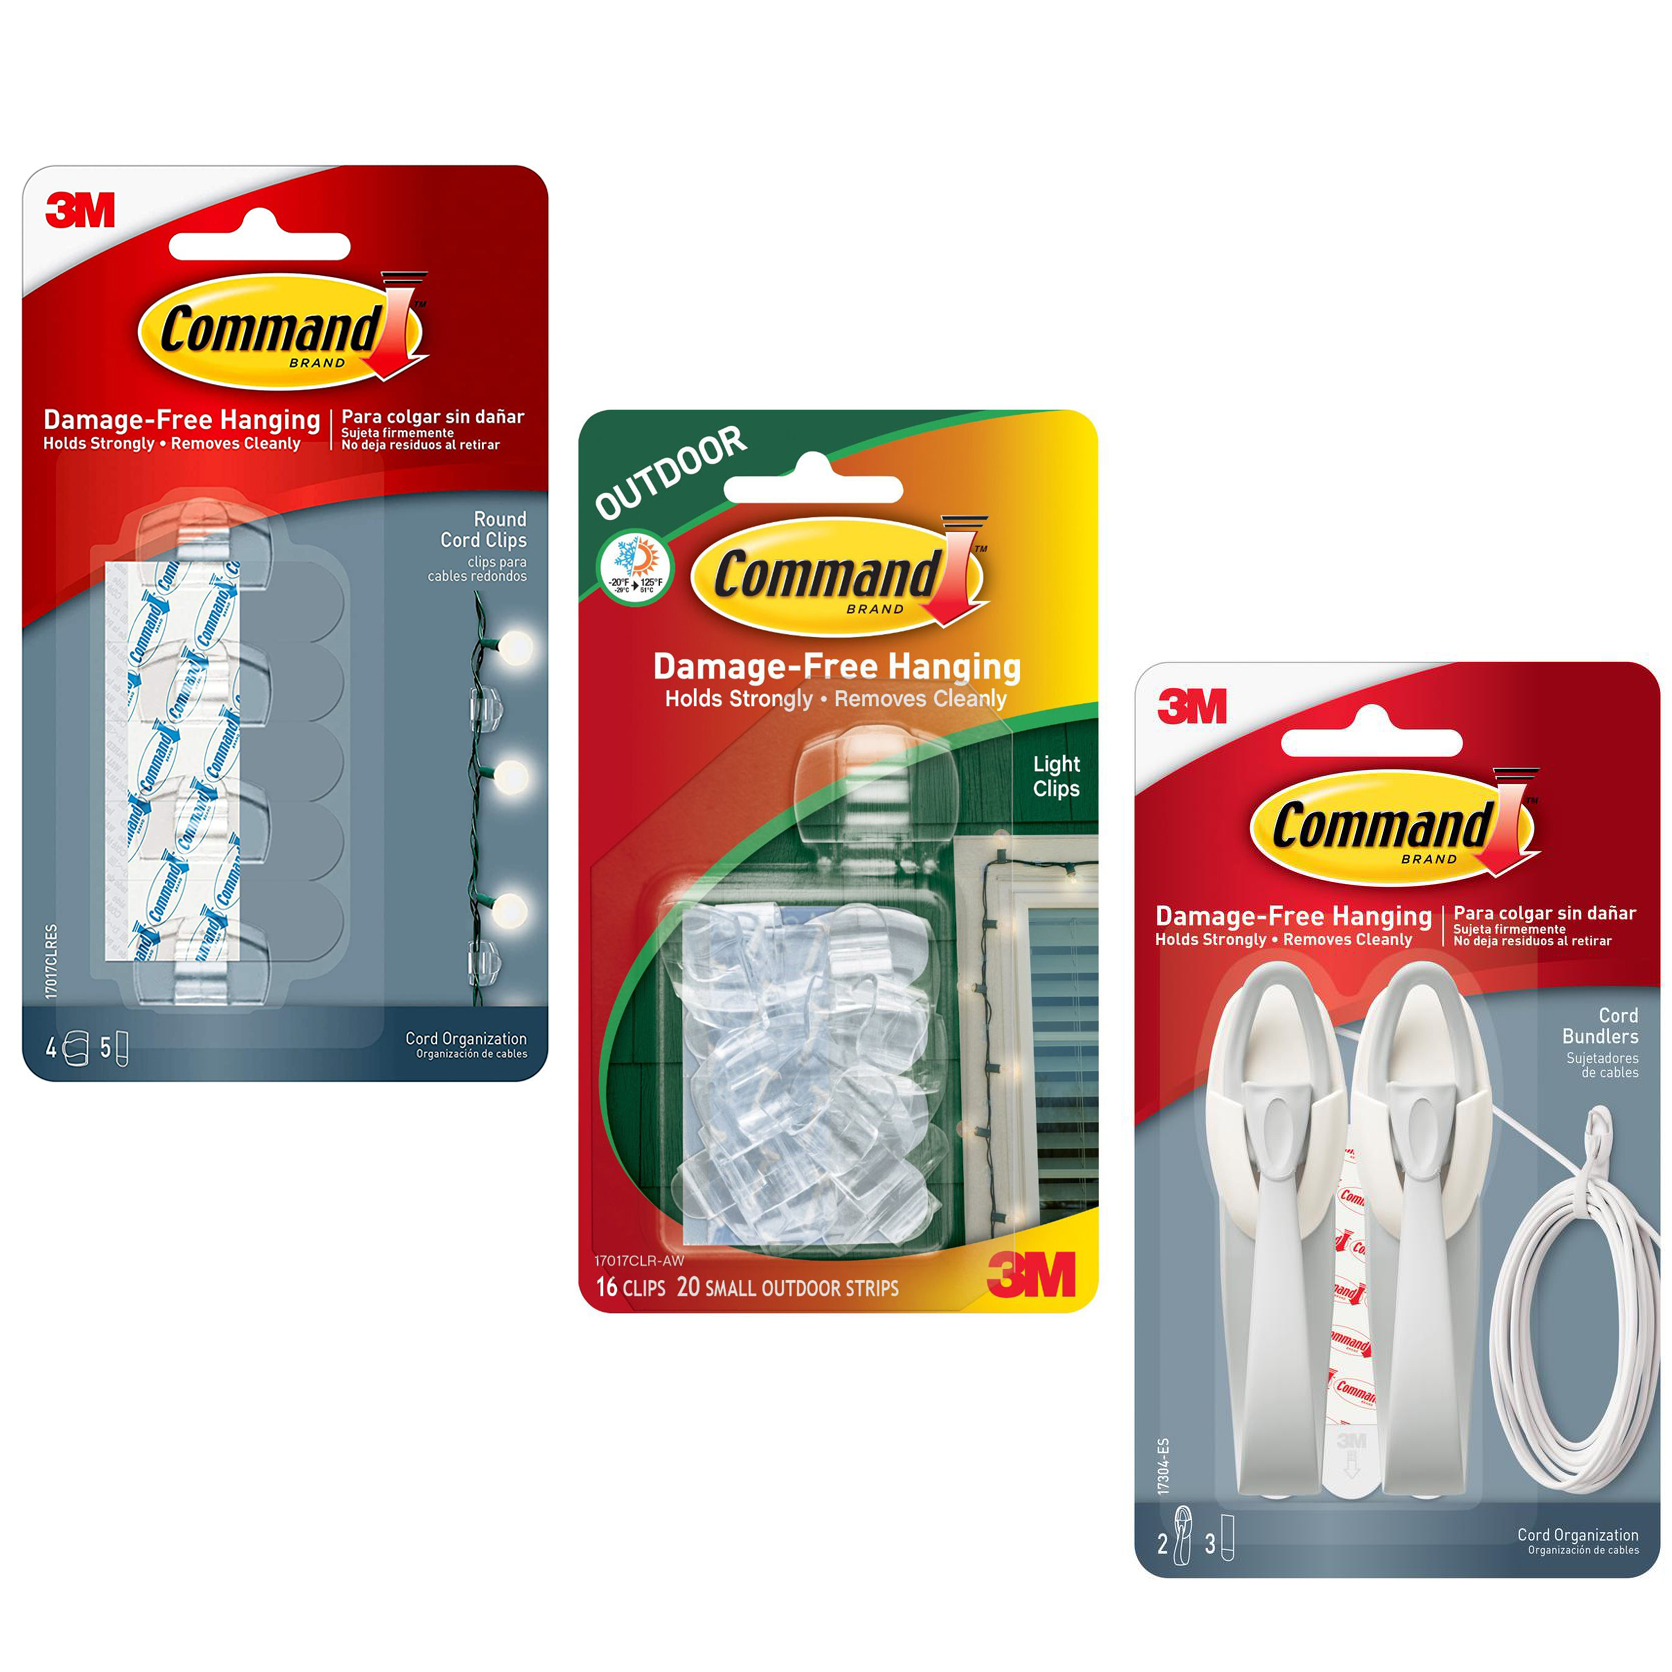 3M CMD-CL Command Cord Clips &amp; Bundlers [Removable]